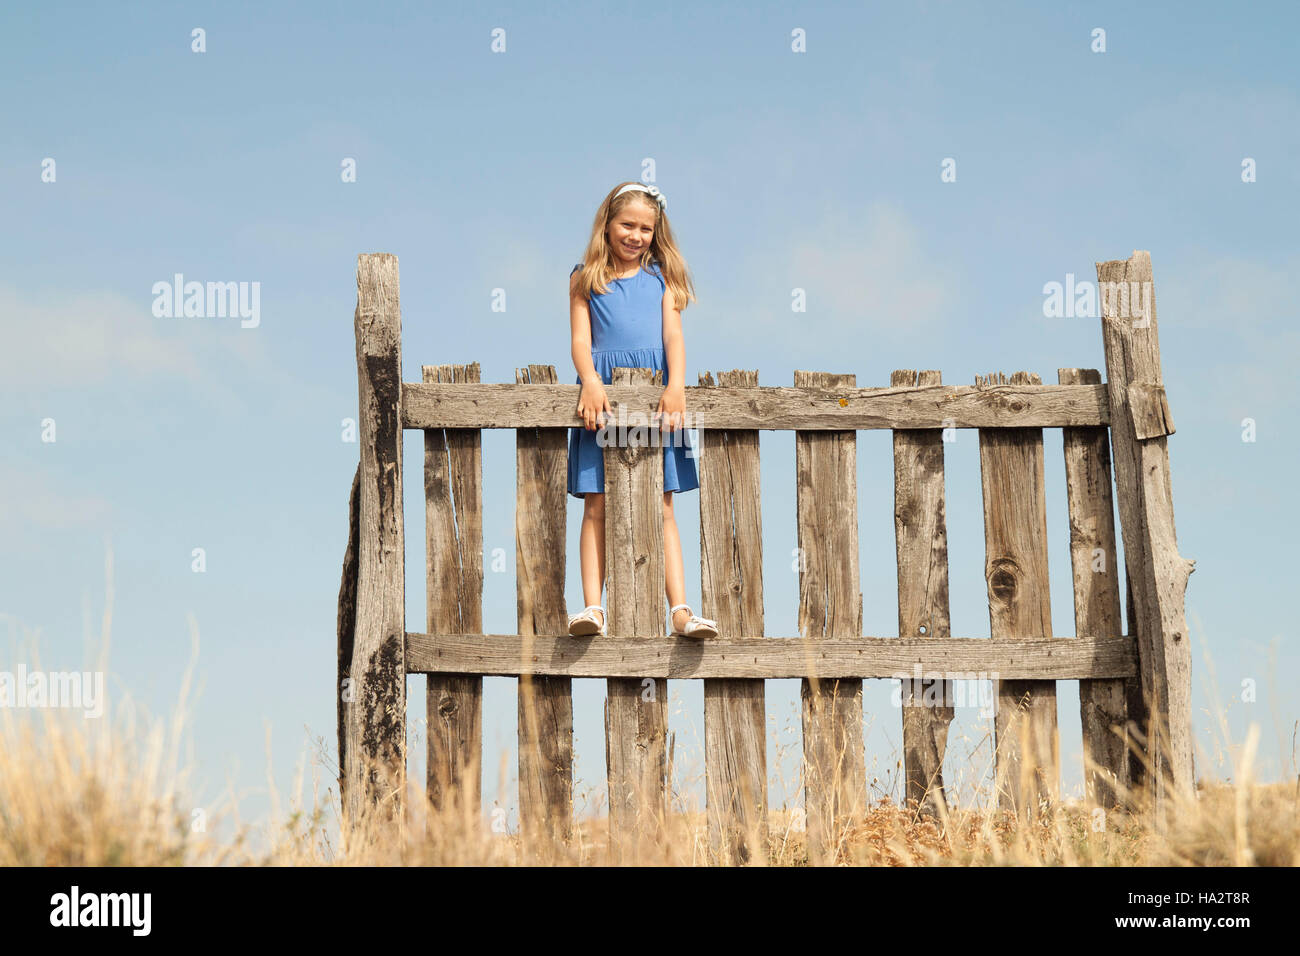 Girl standing on a fence Stock Photo